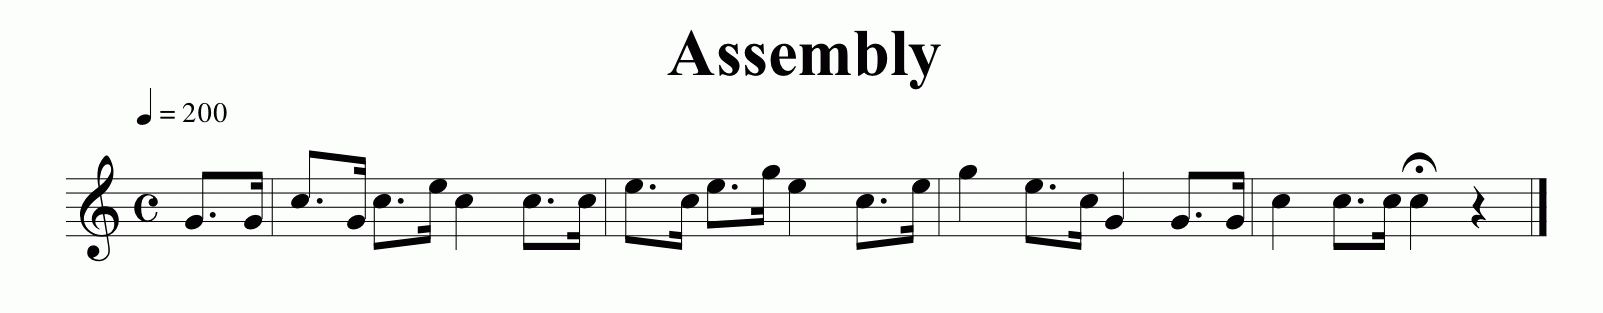 Music for the Assembly bugle call